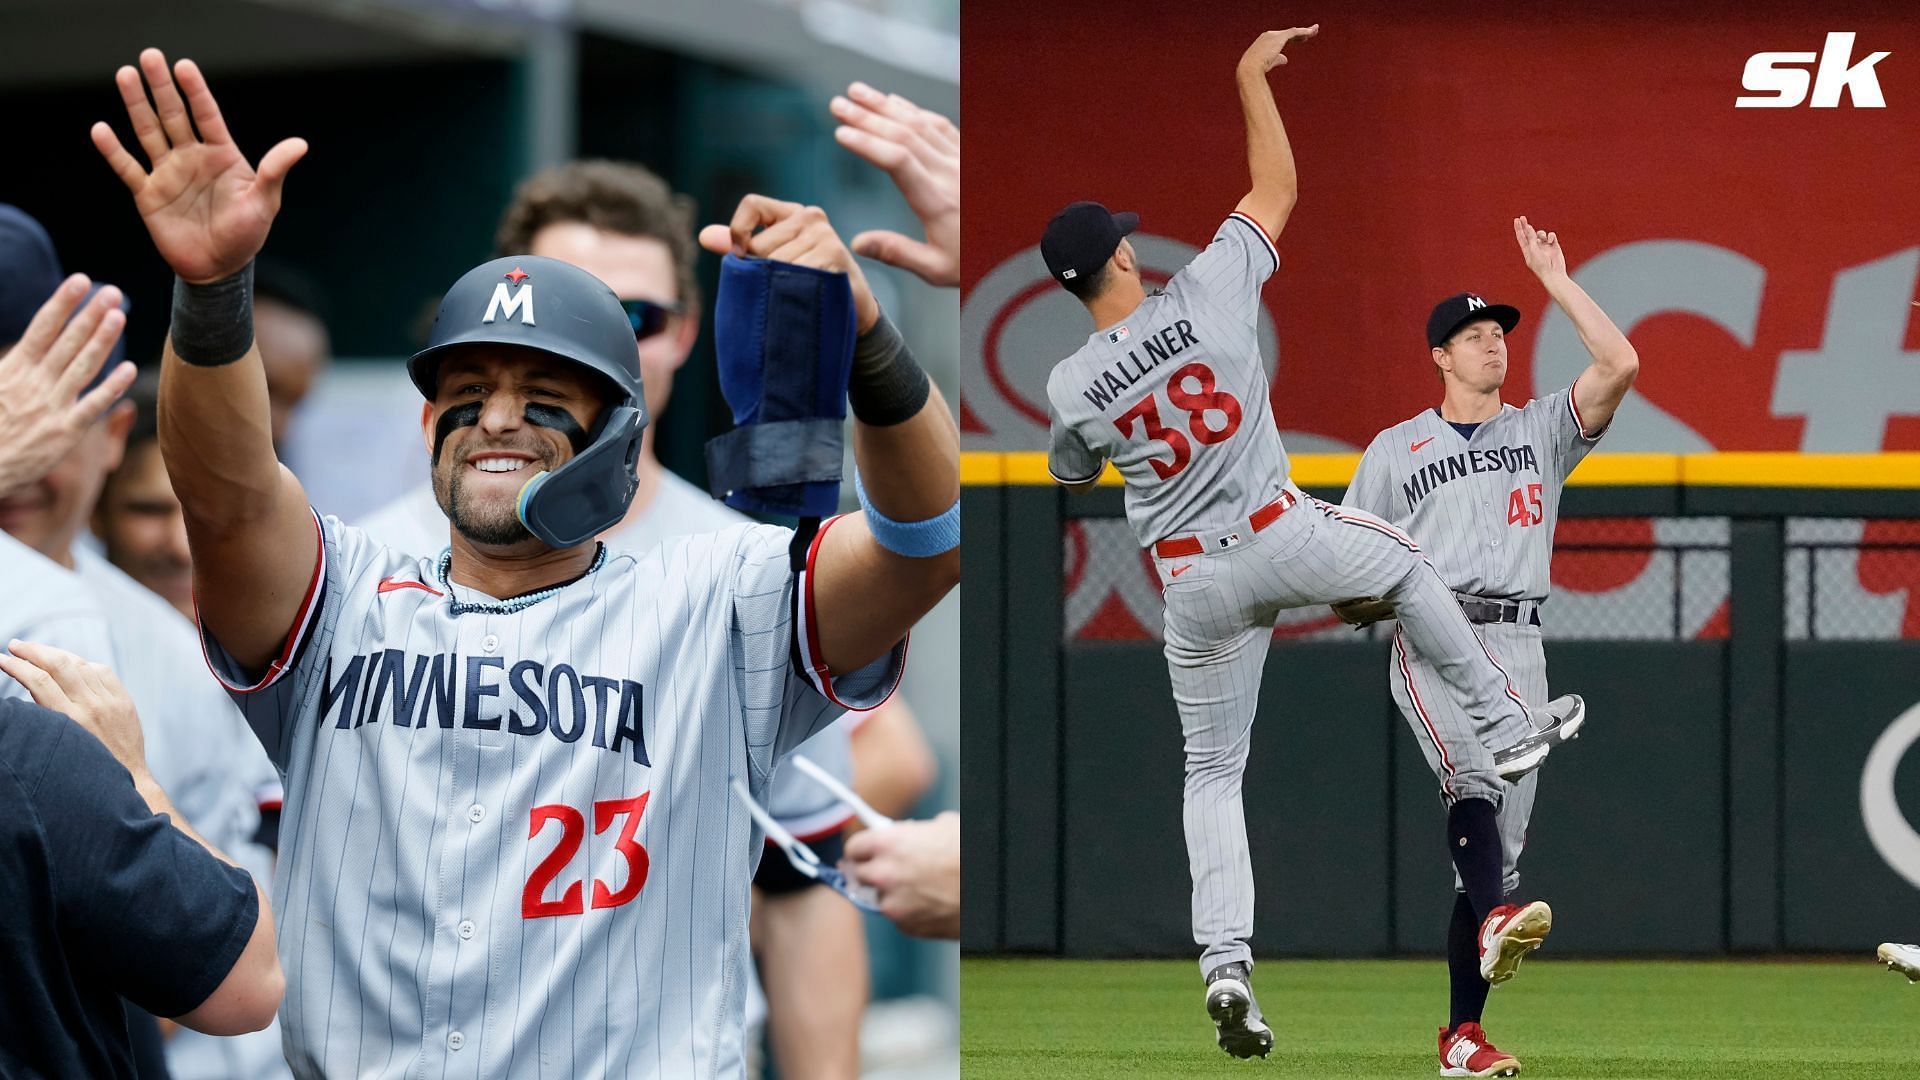 The Twins are capable of repeating as AL Central champs - Beyond